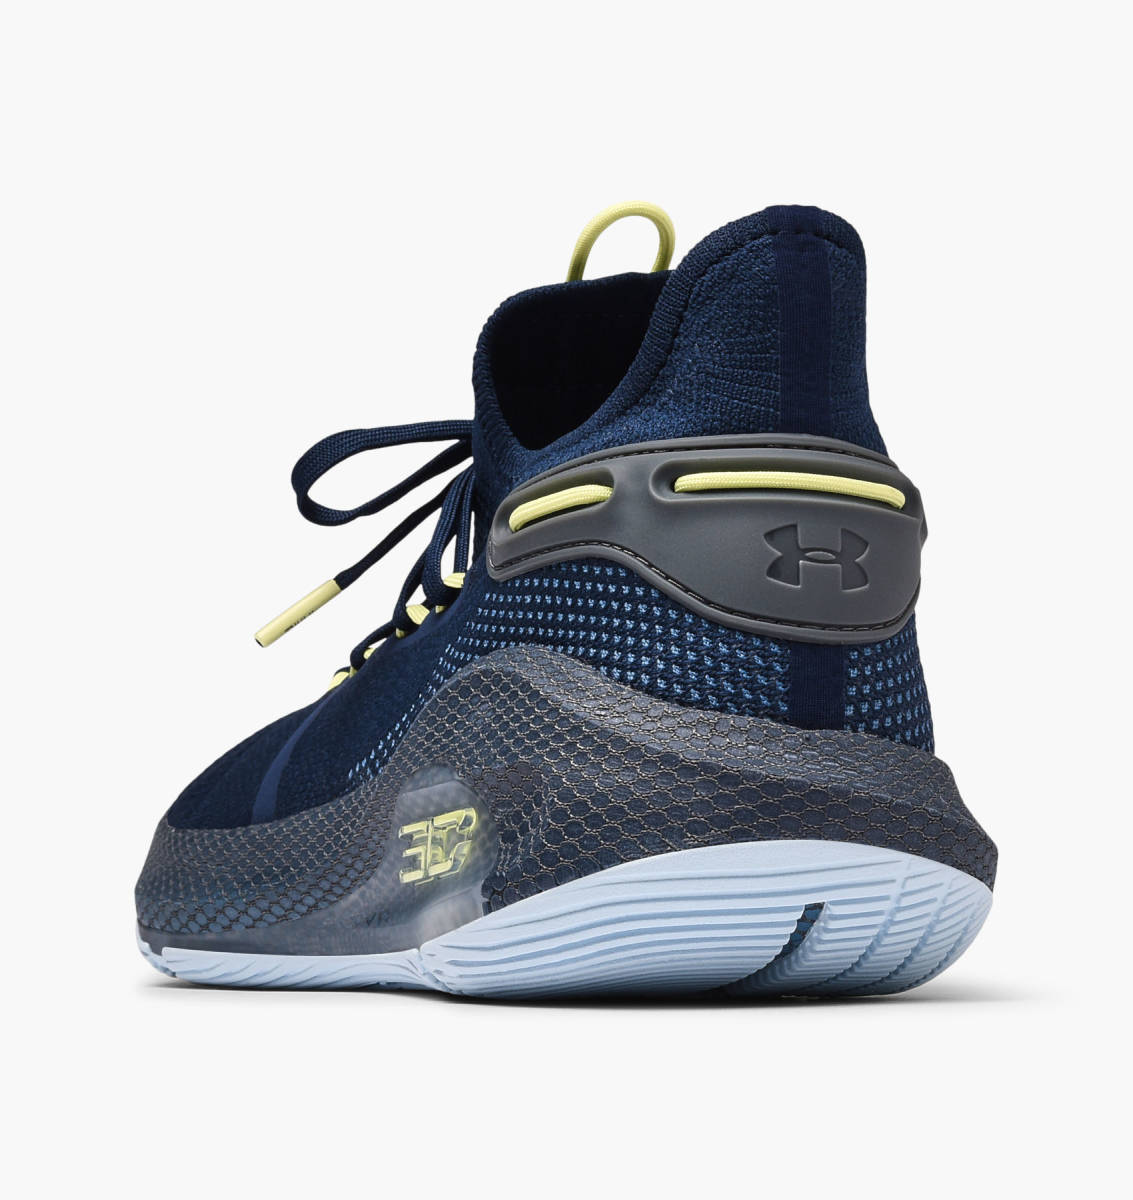 Now Available: Under Armour Curry 6 